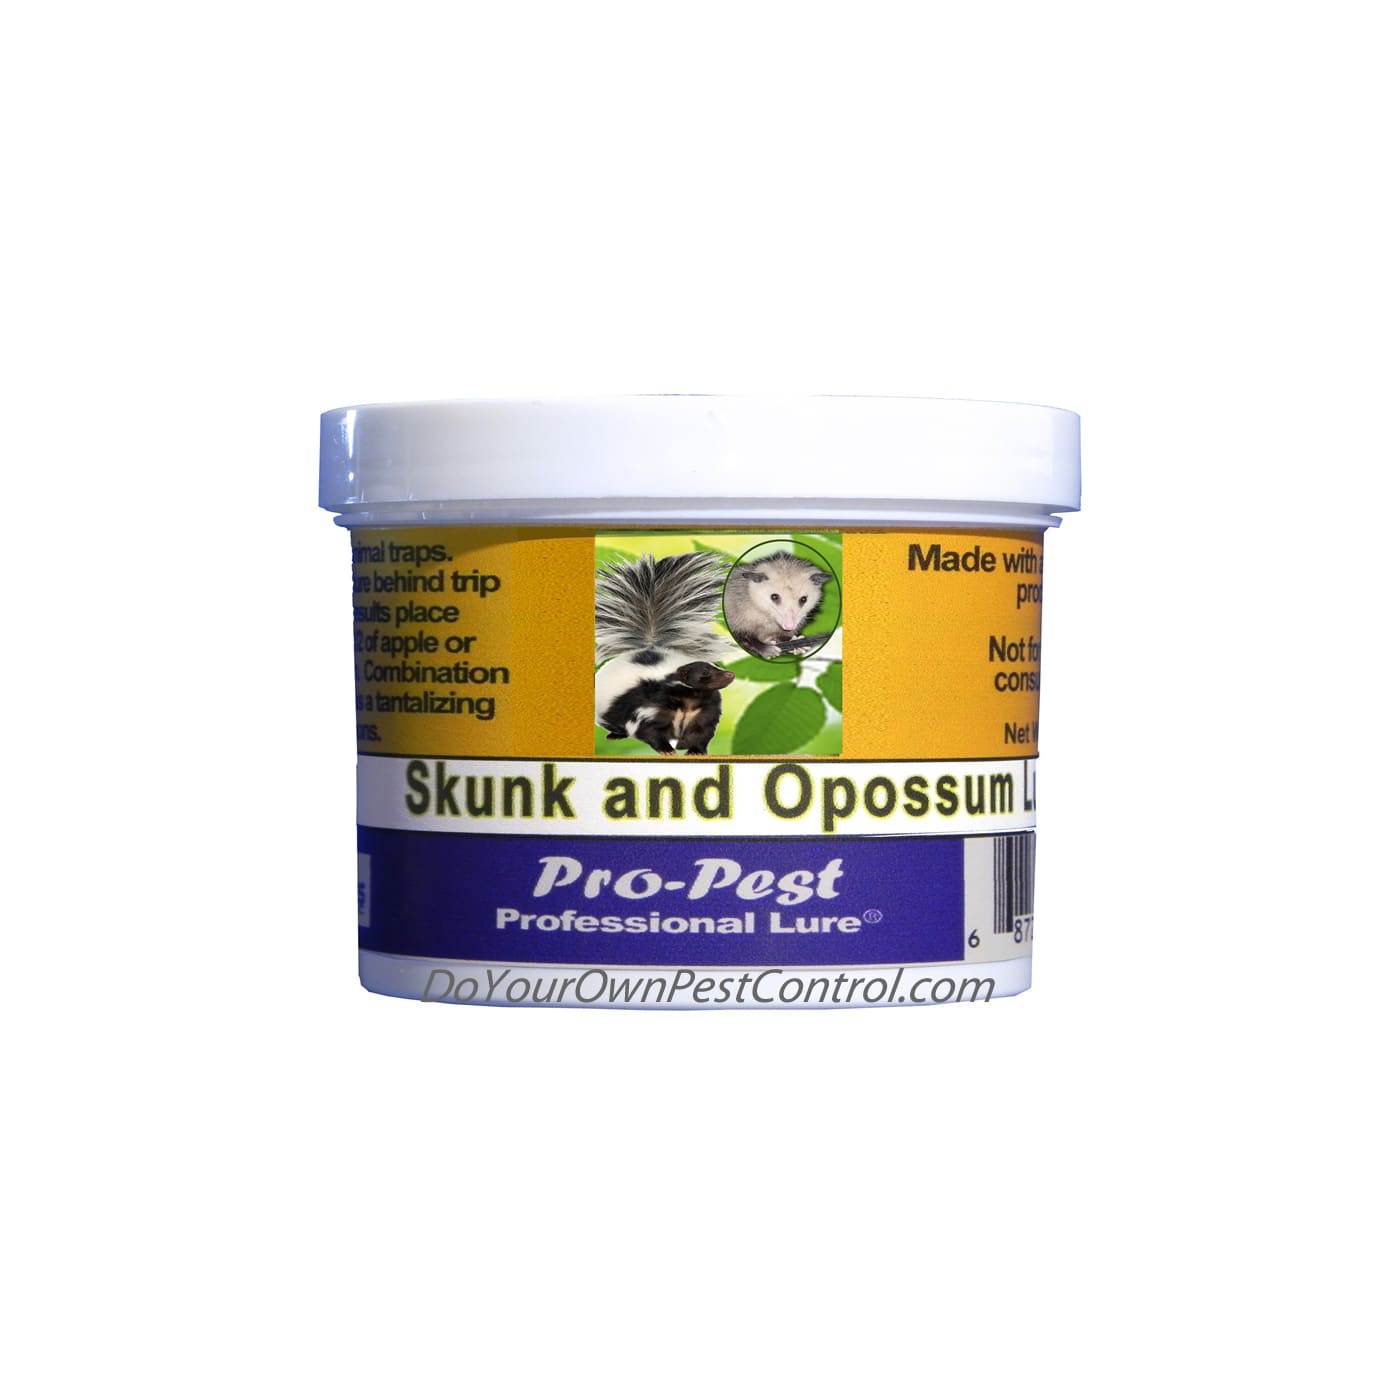 Pro-Pest Professional Lures for Skunk & Opossums